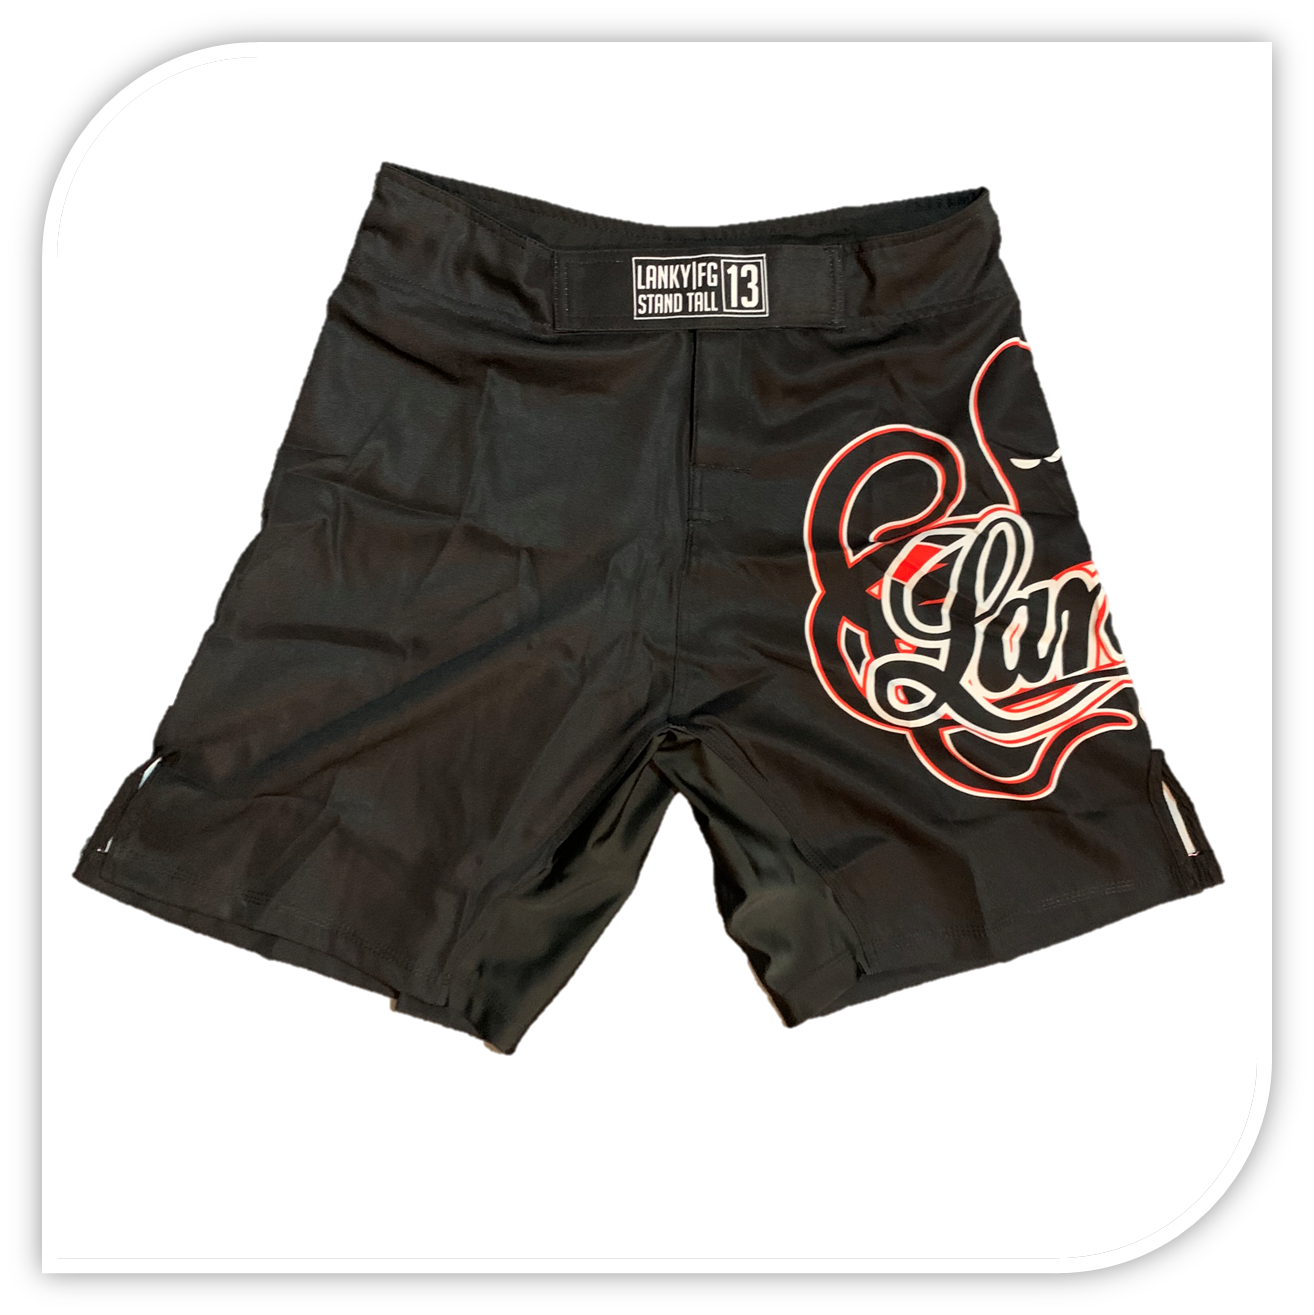 Lanky Black Fight Shorts - Traditional Cut